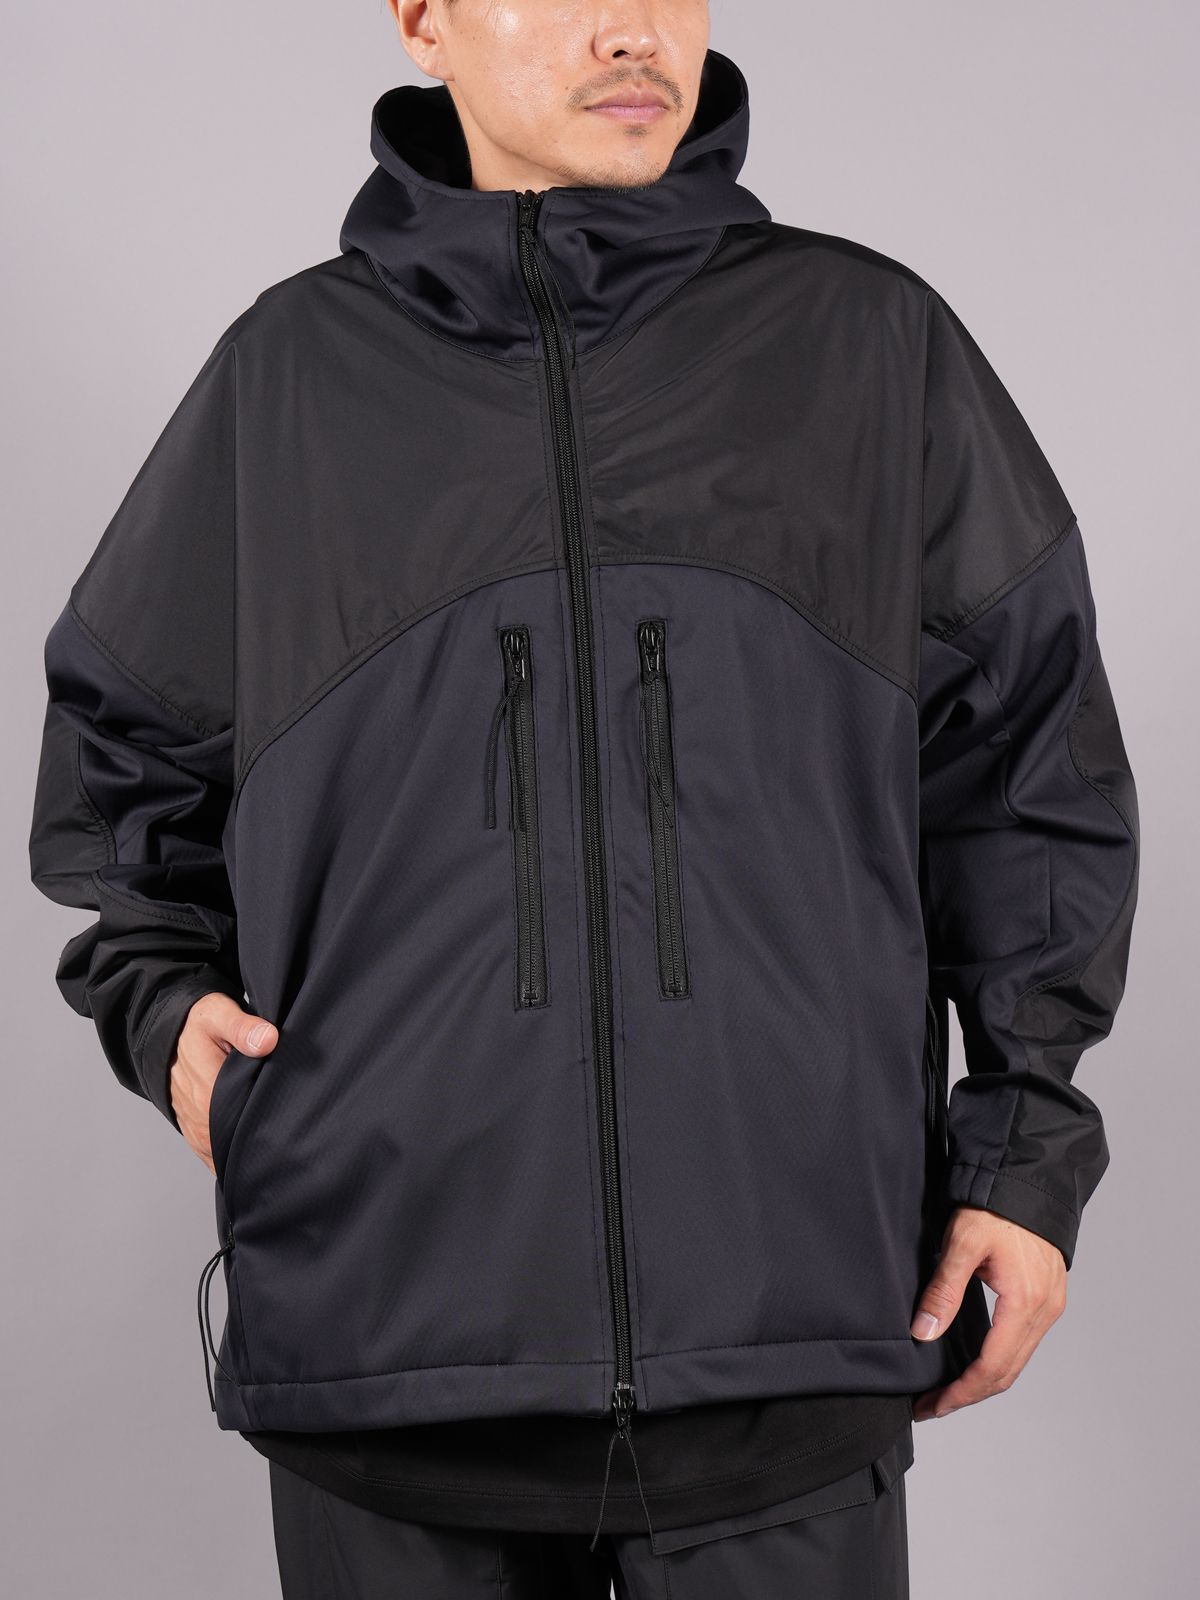 Sleevelength79WINDSTOPPER PRODUCTS BY GORE-TEX LABS